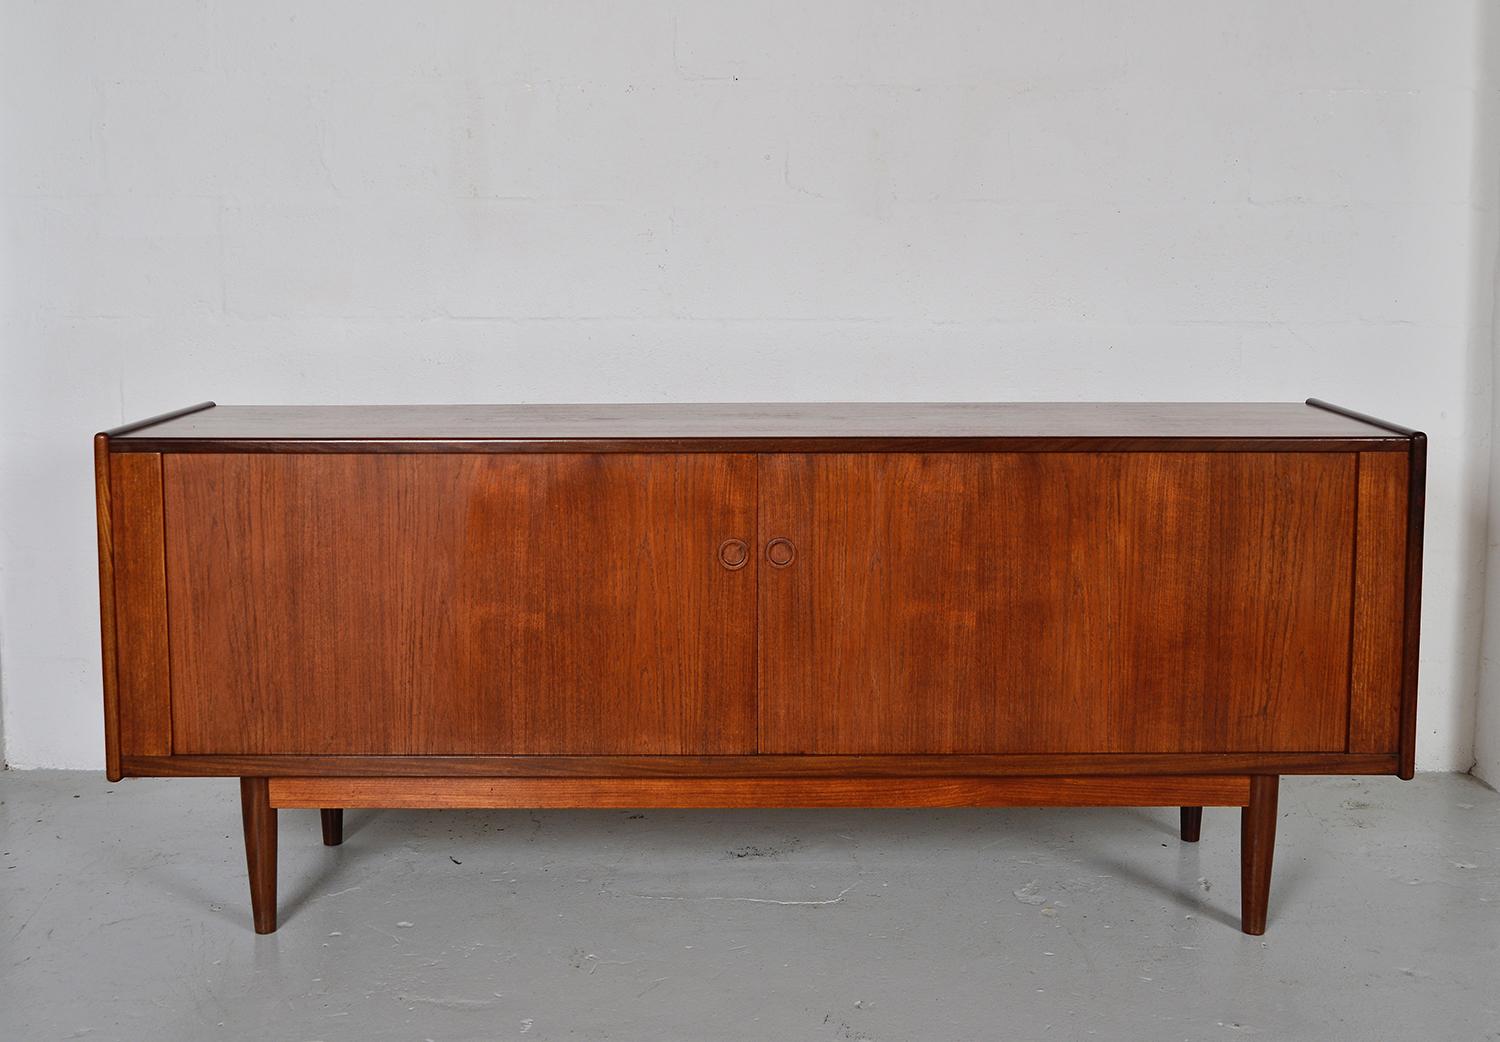 Early 1960s Danish modern teak sideboard with unusual full width sliding tambour doors, which consist of precise machined teak slats set on a thick oil cloth that slide along tracks, and disappear into the unit itself. This is a very nicely made